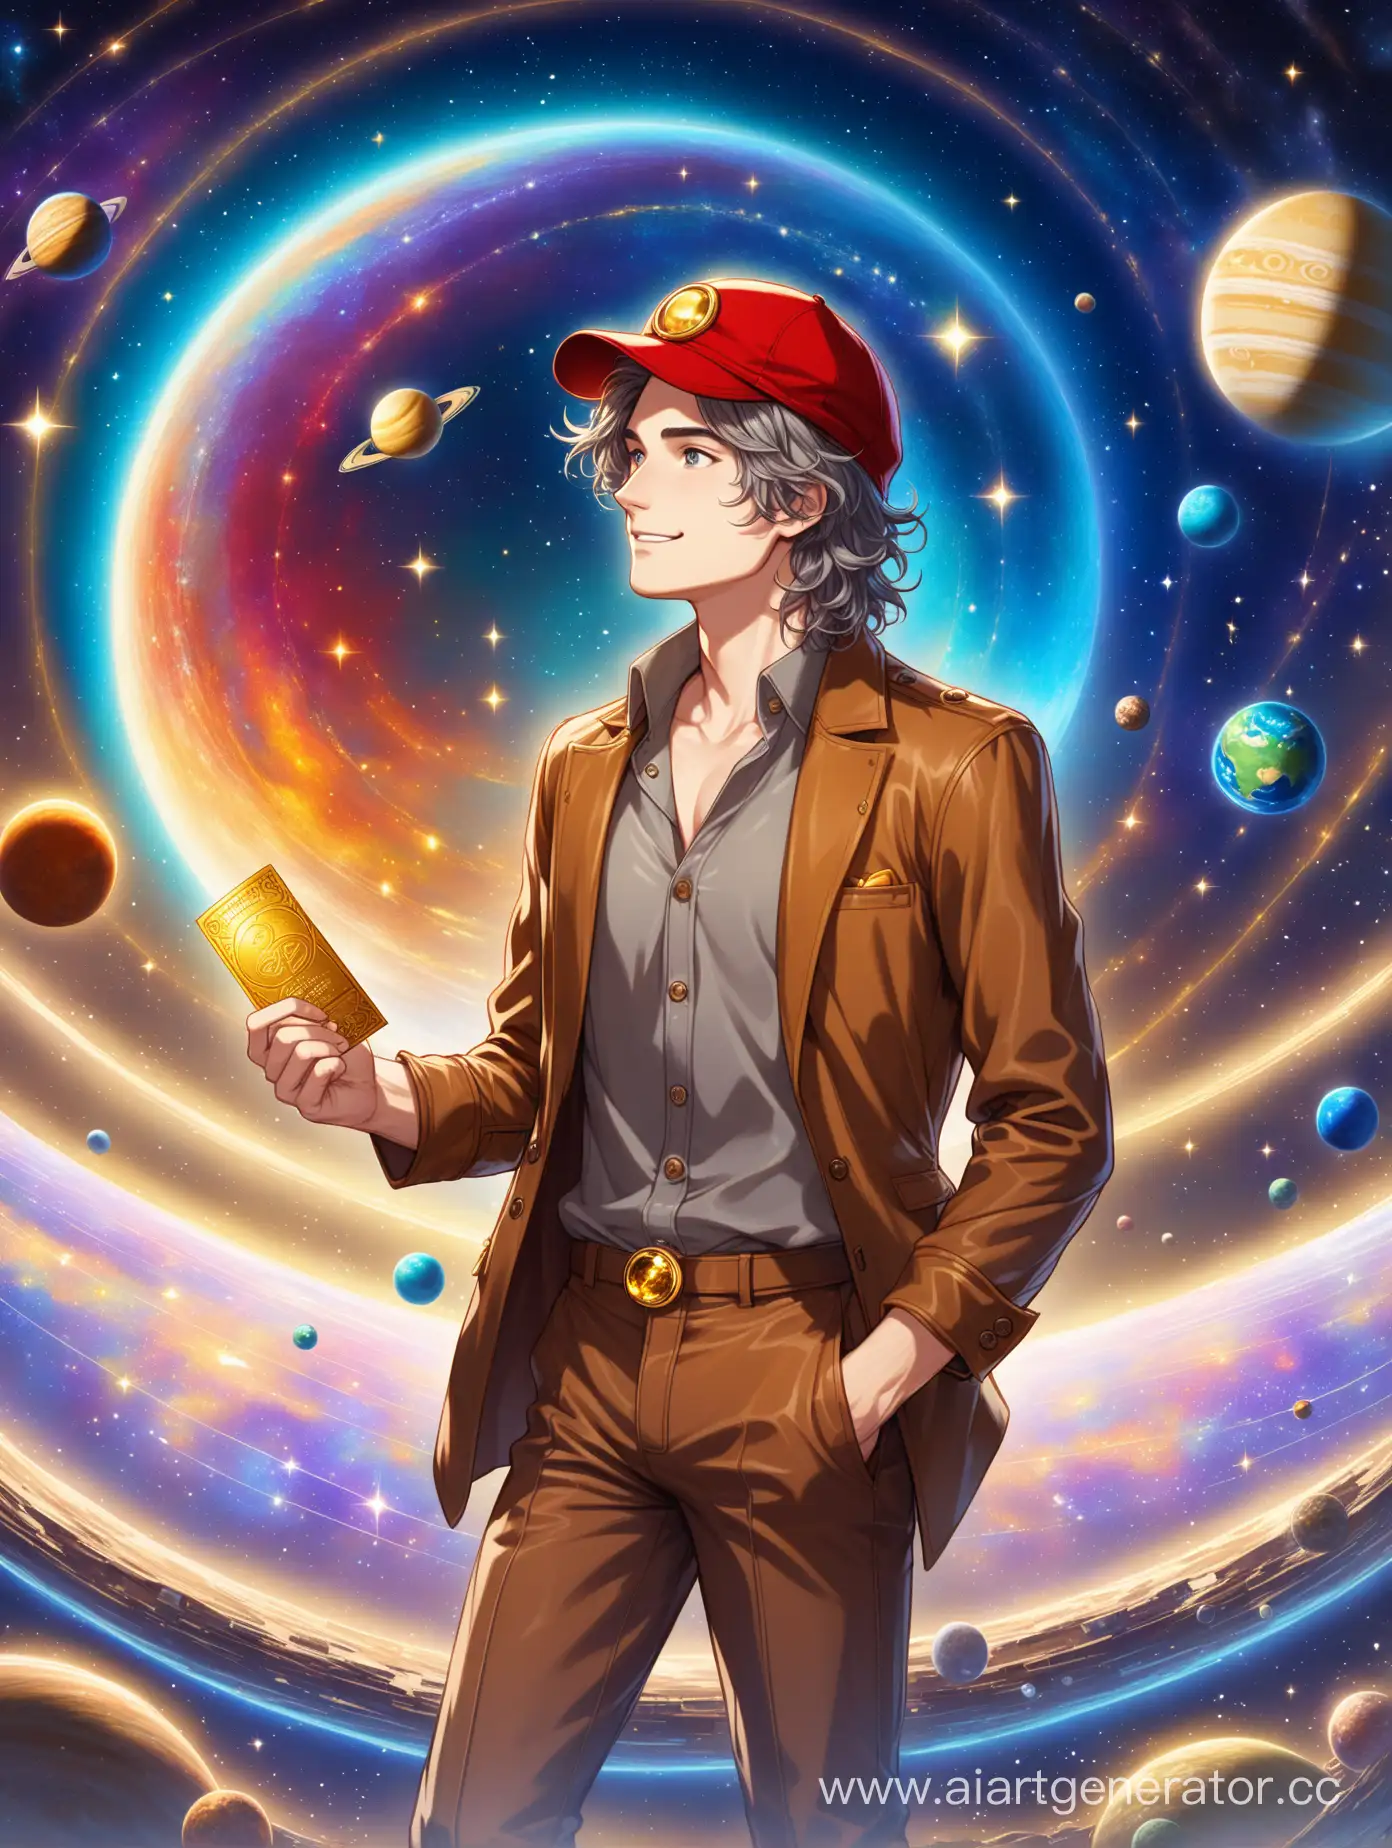 A tall young man, gray long disheveled hair, gray radiant eyes, a gray shirt with two unbuttoned buttons, a brown jacket with a golden ticket in the form of a brooch, leather bracelets on his arms, a red cap, brown trousers, brown boots, a joyful look looking into the future, a cosmic landscape many planets and stars, galaxies